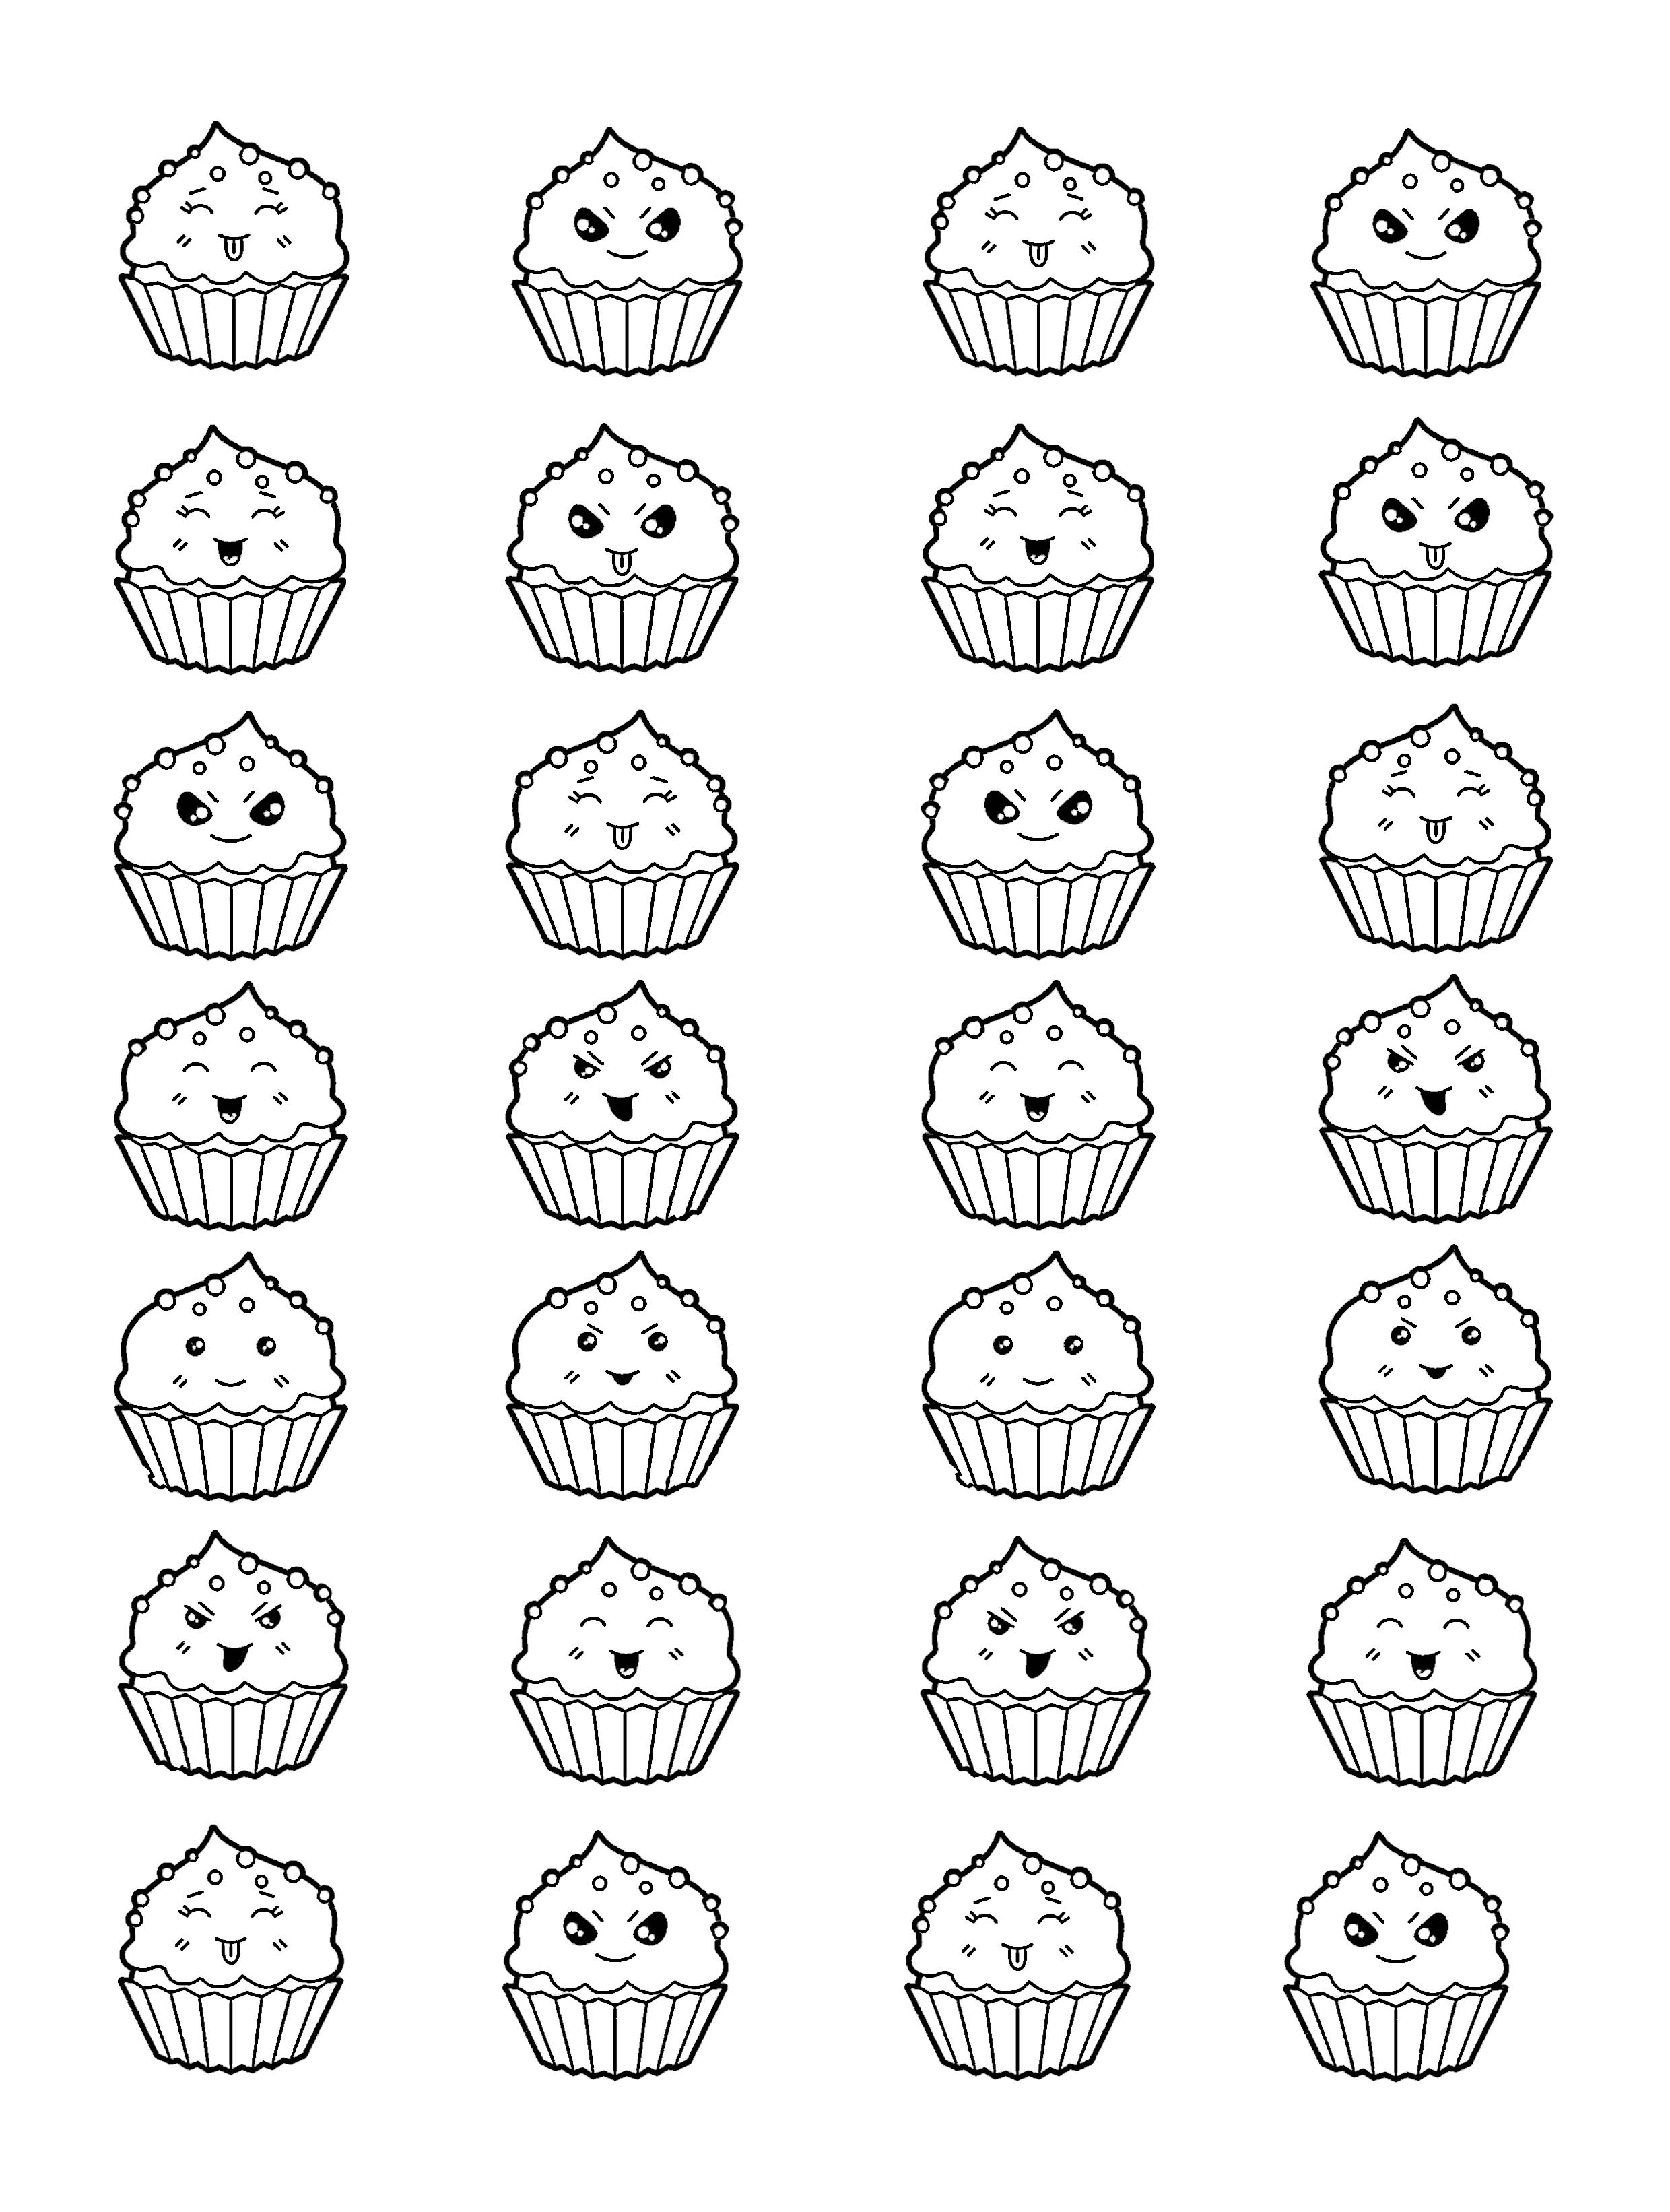 Download Kawai Cup Cakes Cupcakes Adult Coloring Pages